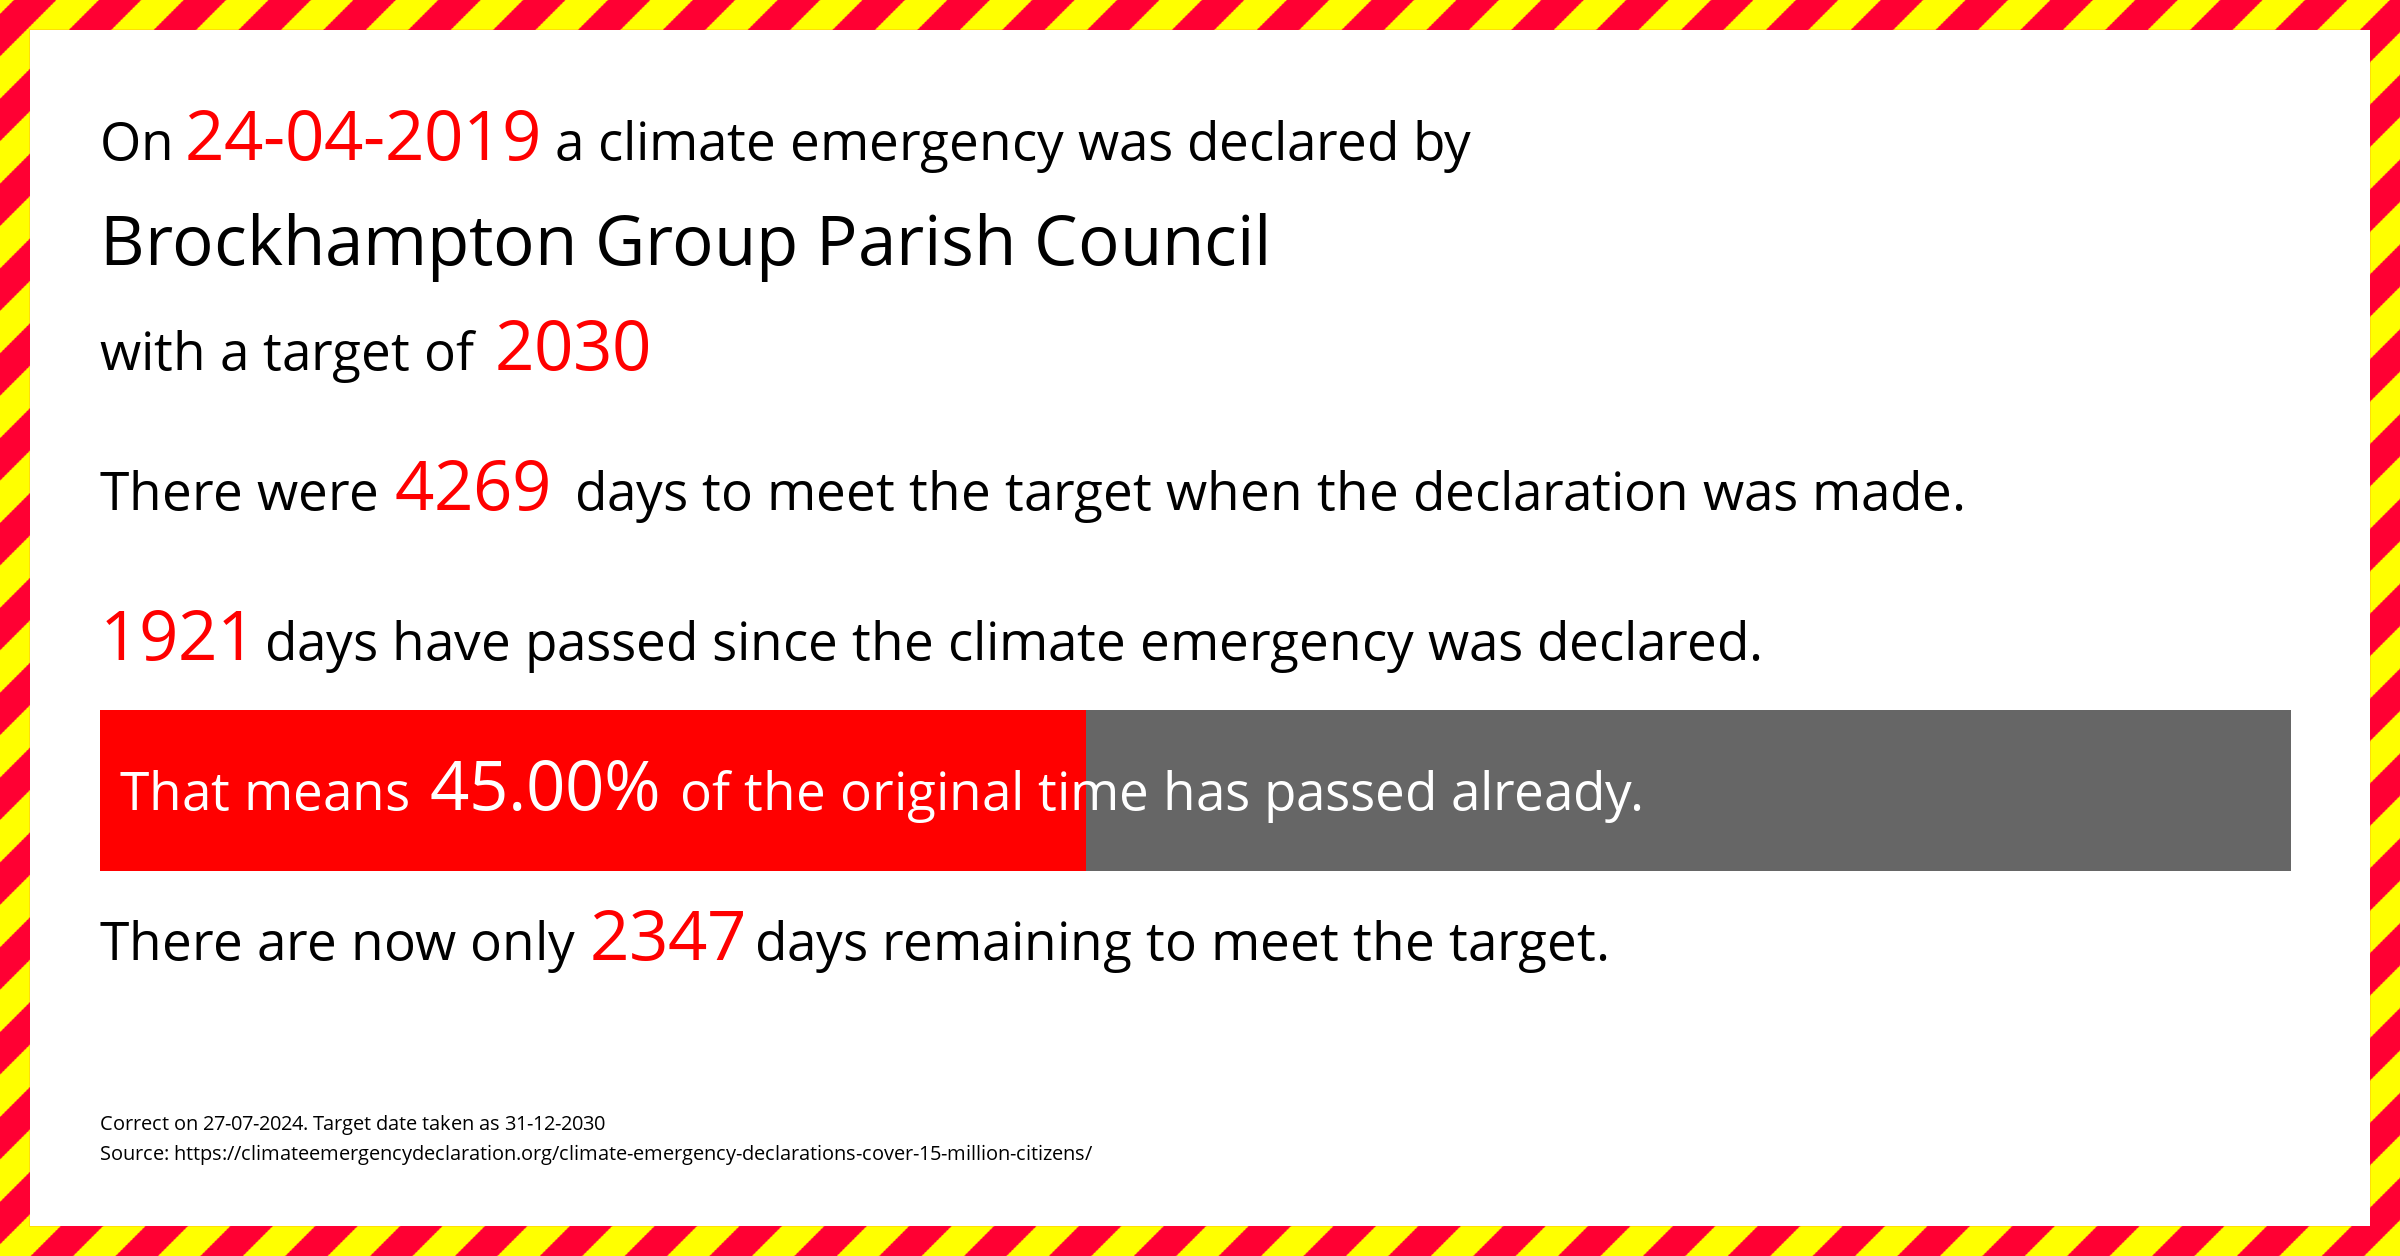 Brockhampton Group Parish Council  declared a Climate emergency on Wednesday 24th April 2019, with a target of 2030.